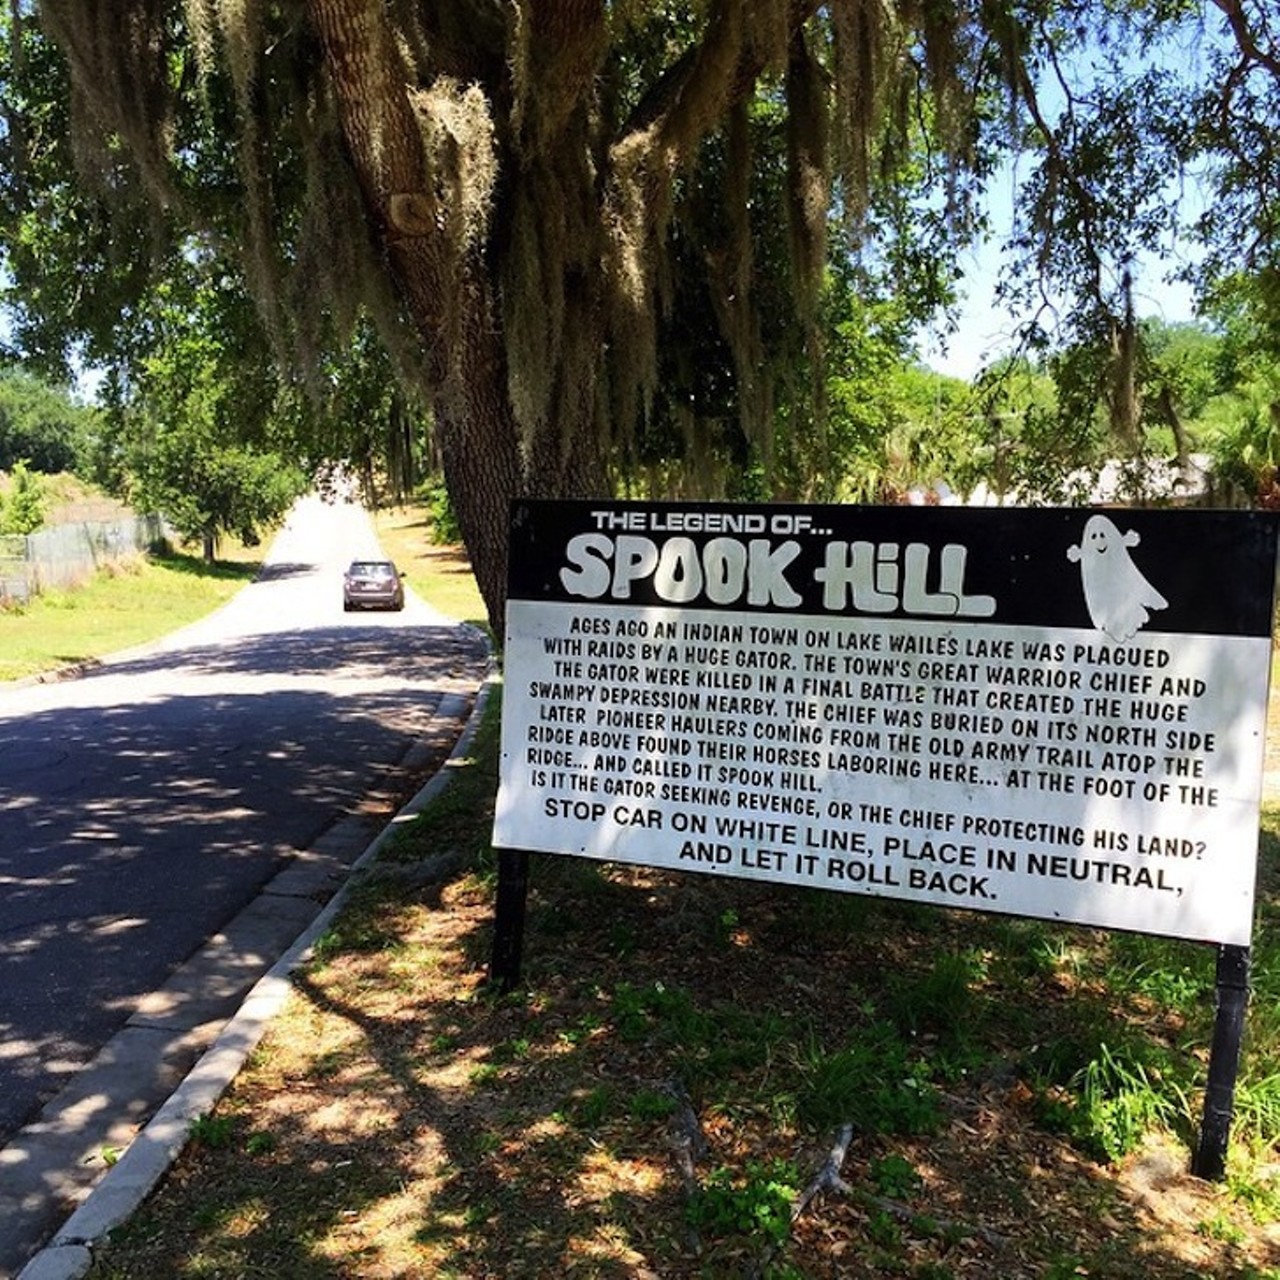 Drive up Spook Hill
Lake Wales Ridge l 5th Street, Lake Wales
Have you ever wanted to defy gravity? Now&#146;s your chance. Take a trip over to Spook Hill, where you can put your car in neutral and watch as your vehicle crawls up the road without a single press of the gas pedal. The road is actually located on a gravity hill, in which the surrounding landscape cause an optical illusion making a slight downhill slope look like an uphill one, but it&#146;s much more fun to think that spirits are behind your car&#146;s creepy crawl.
Photo via potterican/Instagram